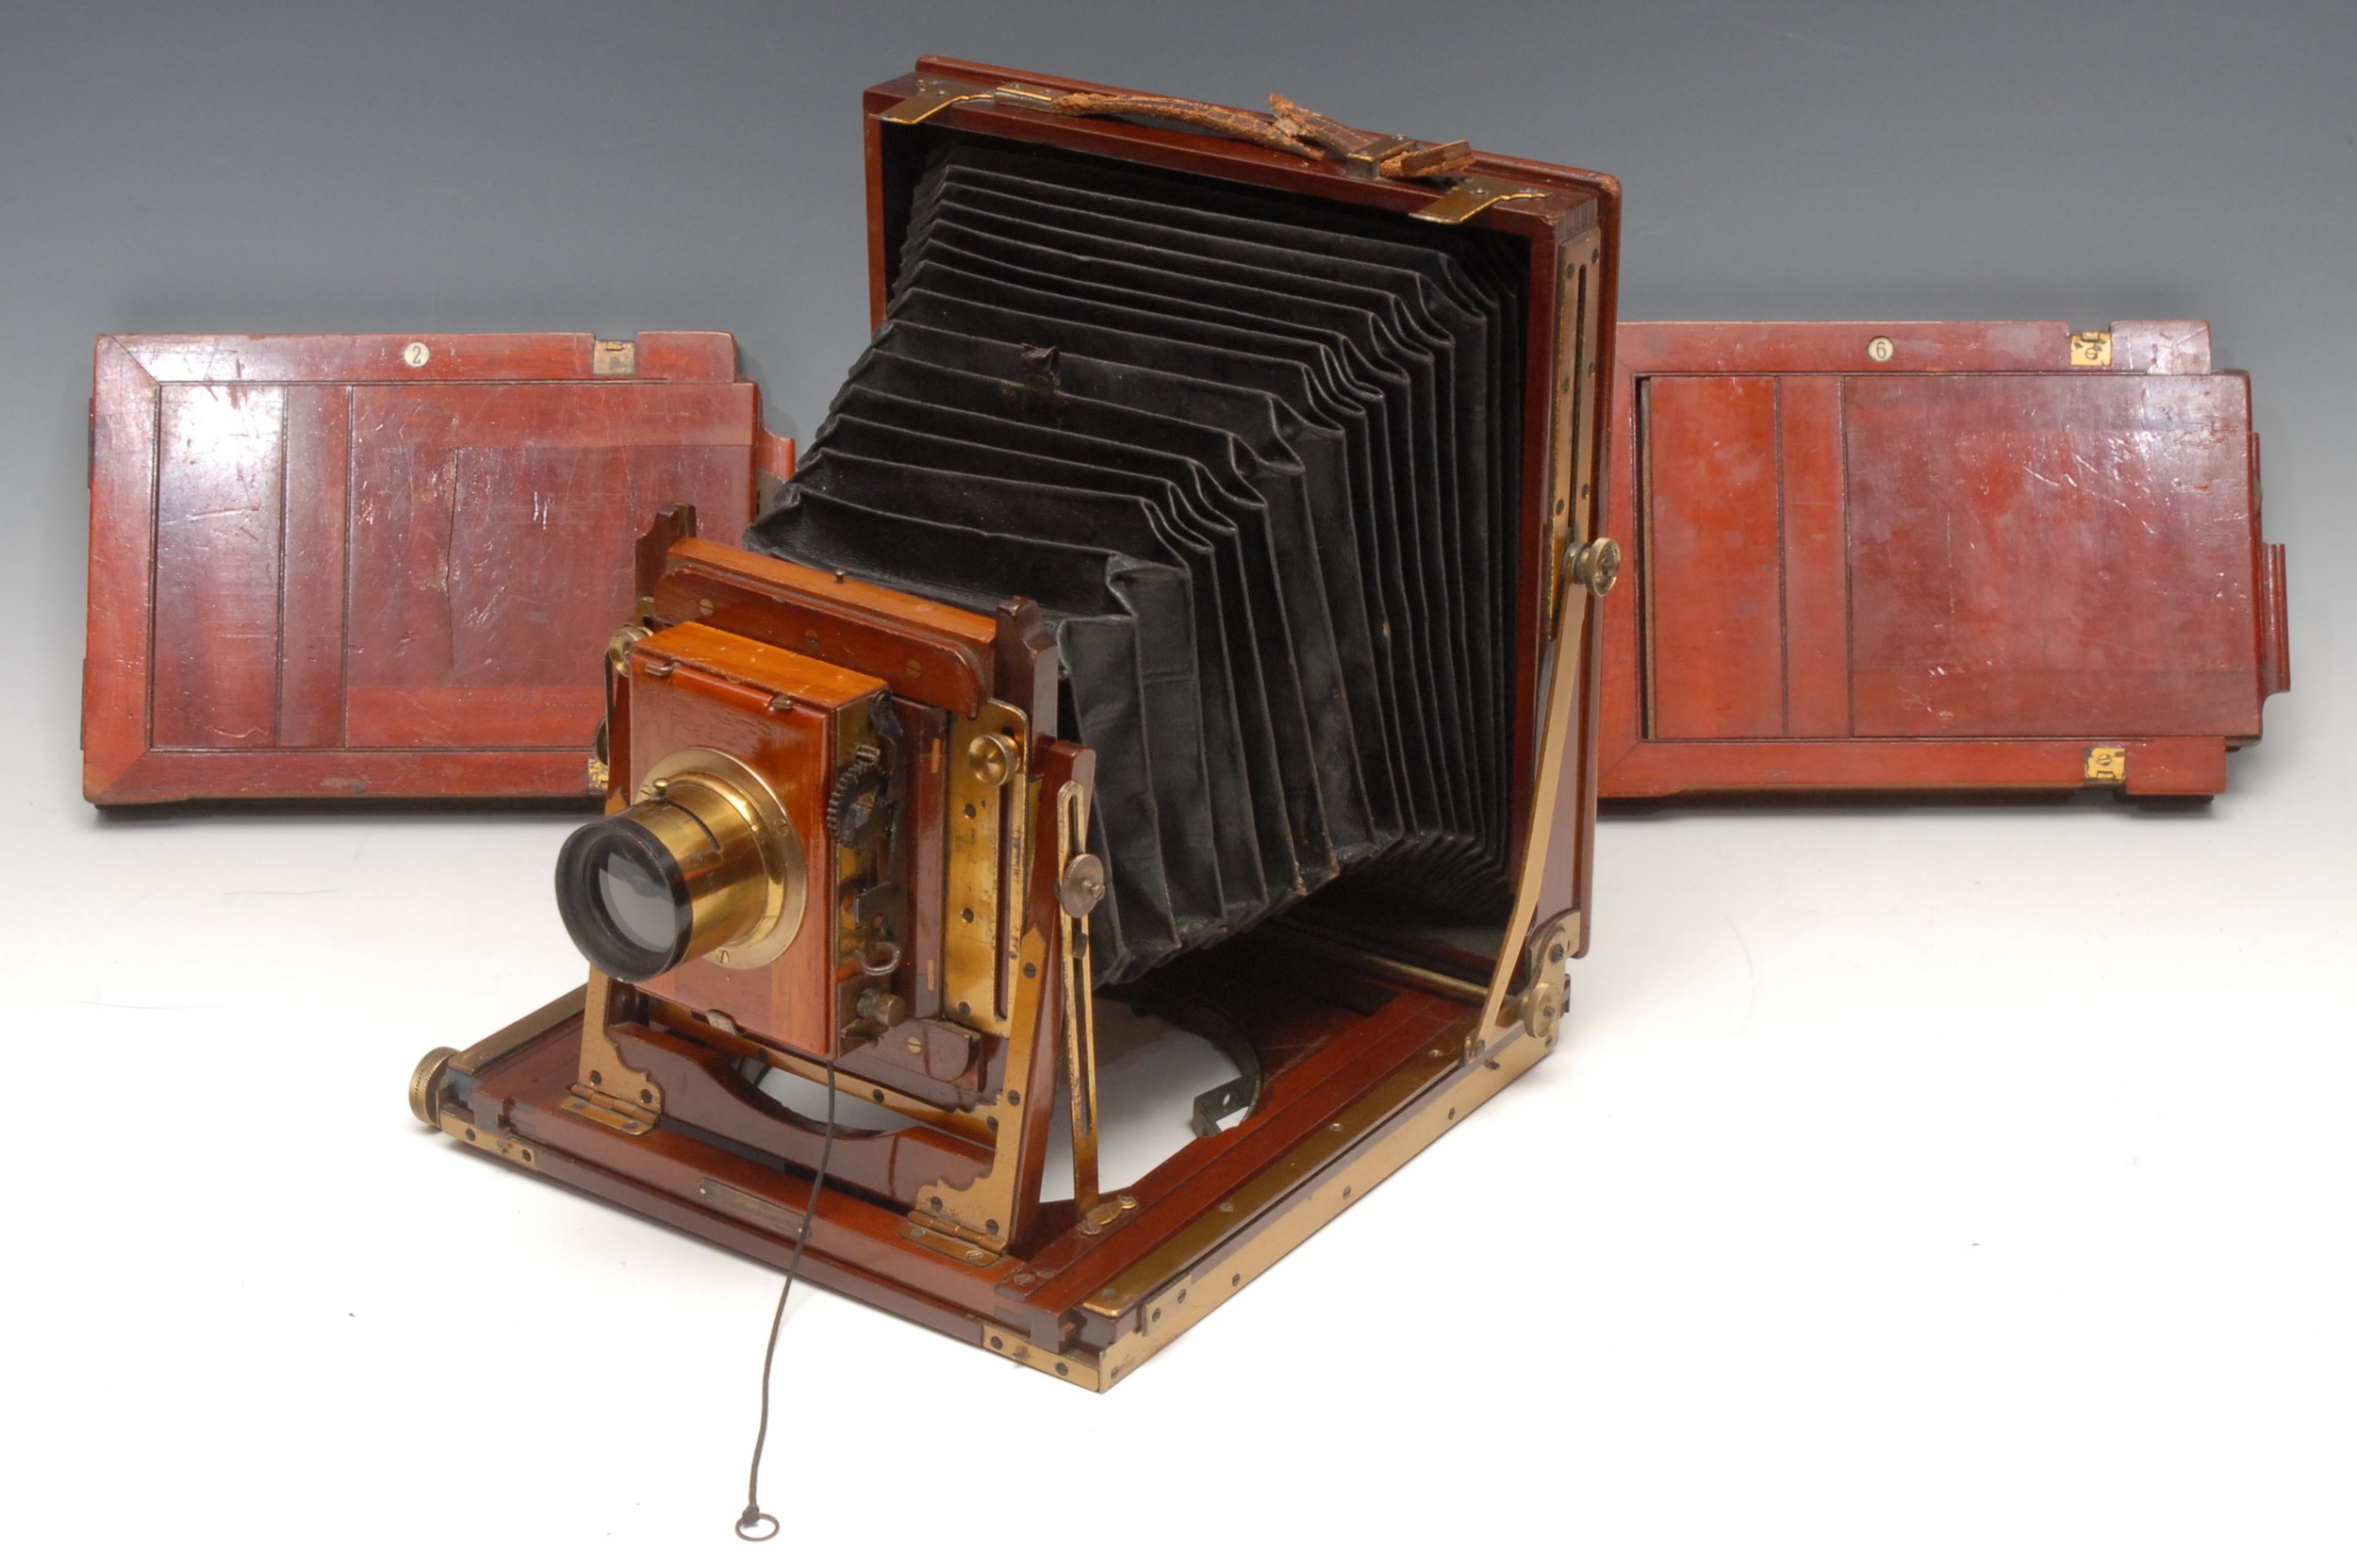 Photography - A W. Butcher & Sons "The National Camera", half-plate folding camera, mahogany body, - Image 6 of 6